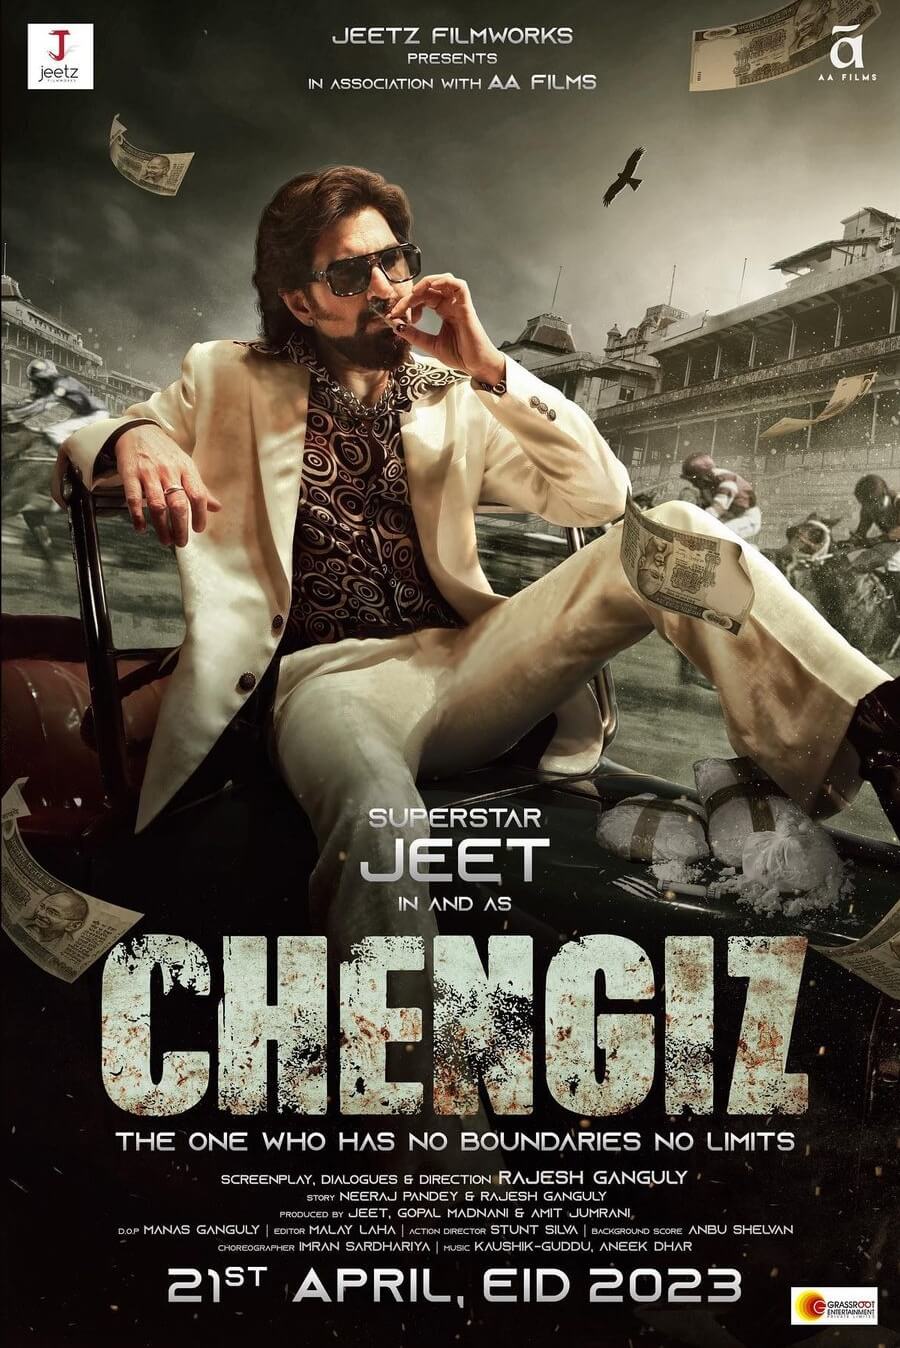 Chengiz Movie (2023) Cast, Release Date, Story, Budget, Collection, Poster, Trailer, Review